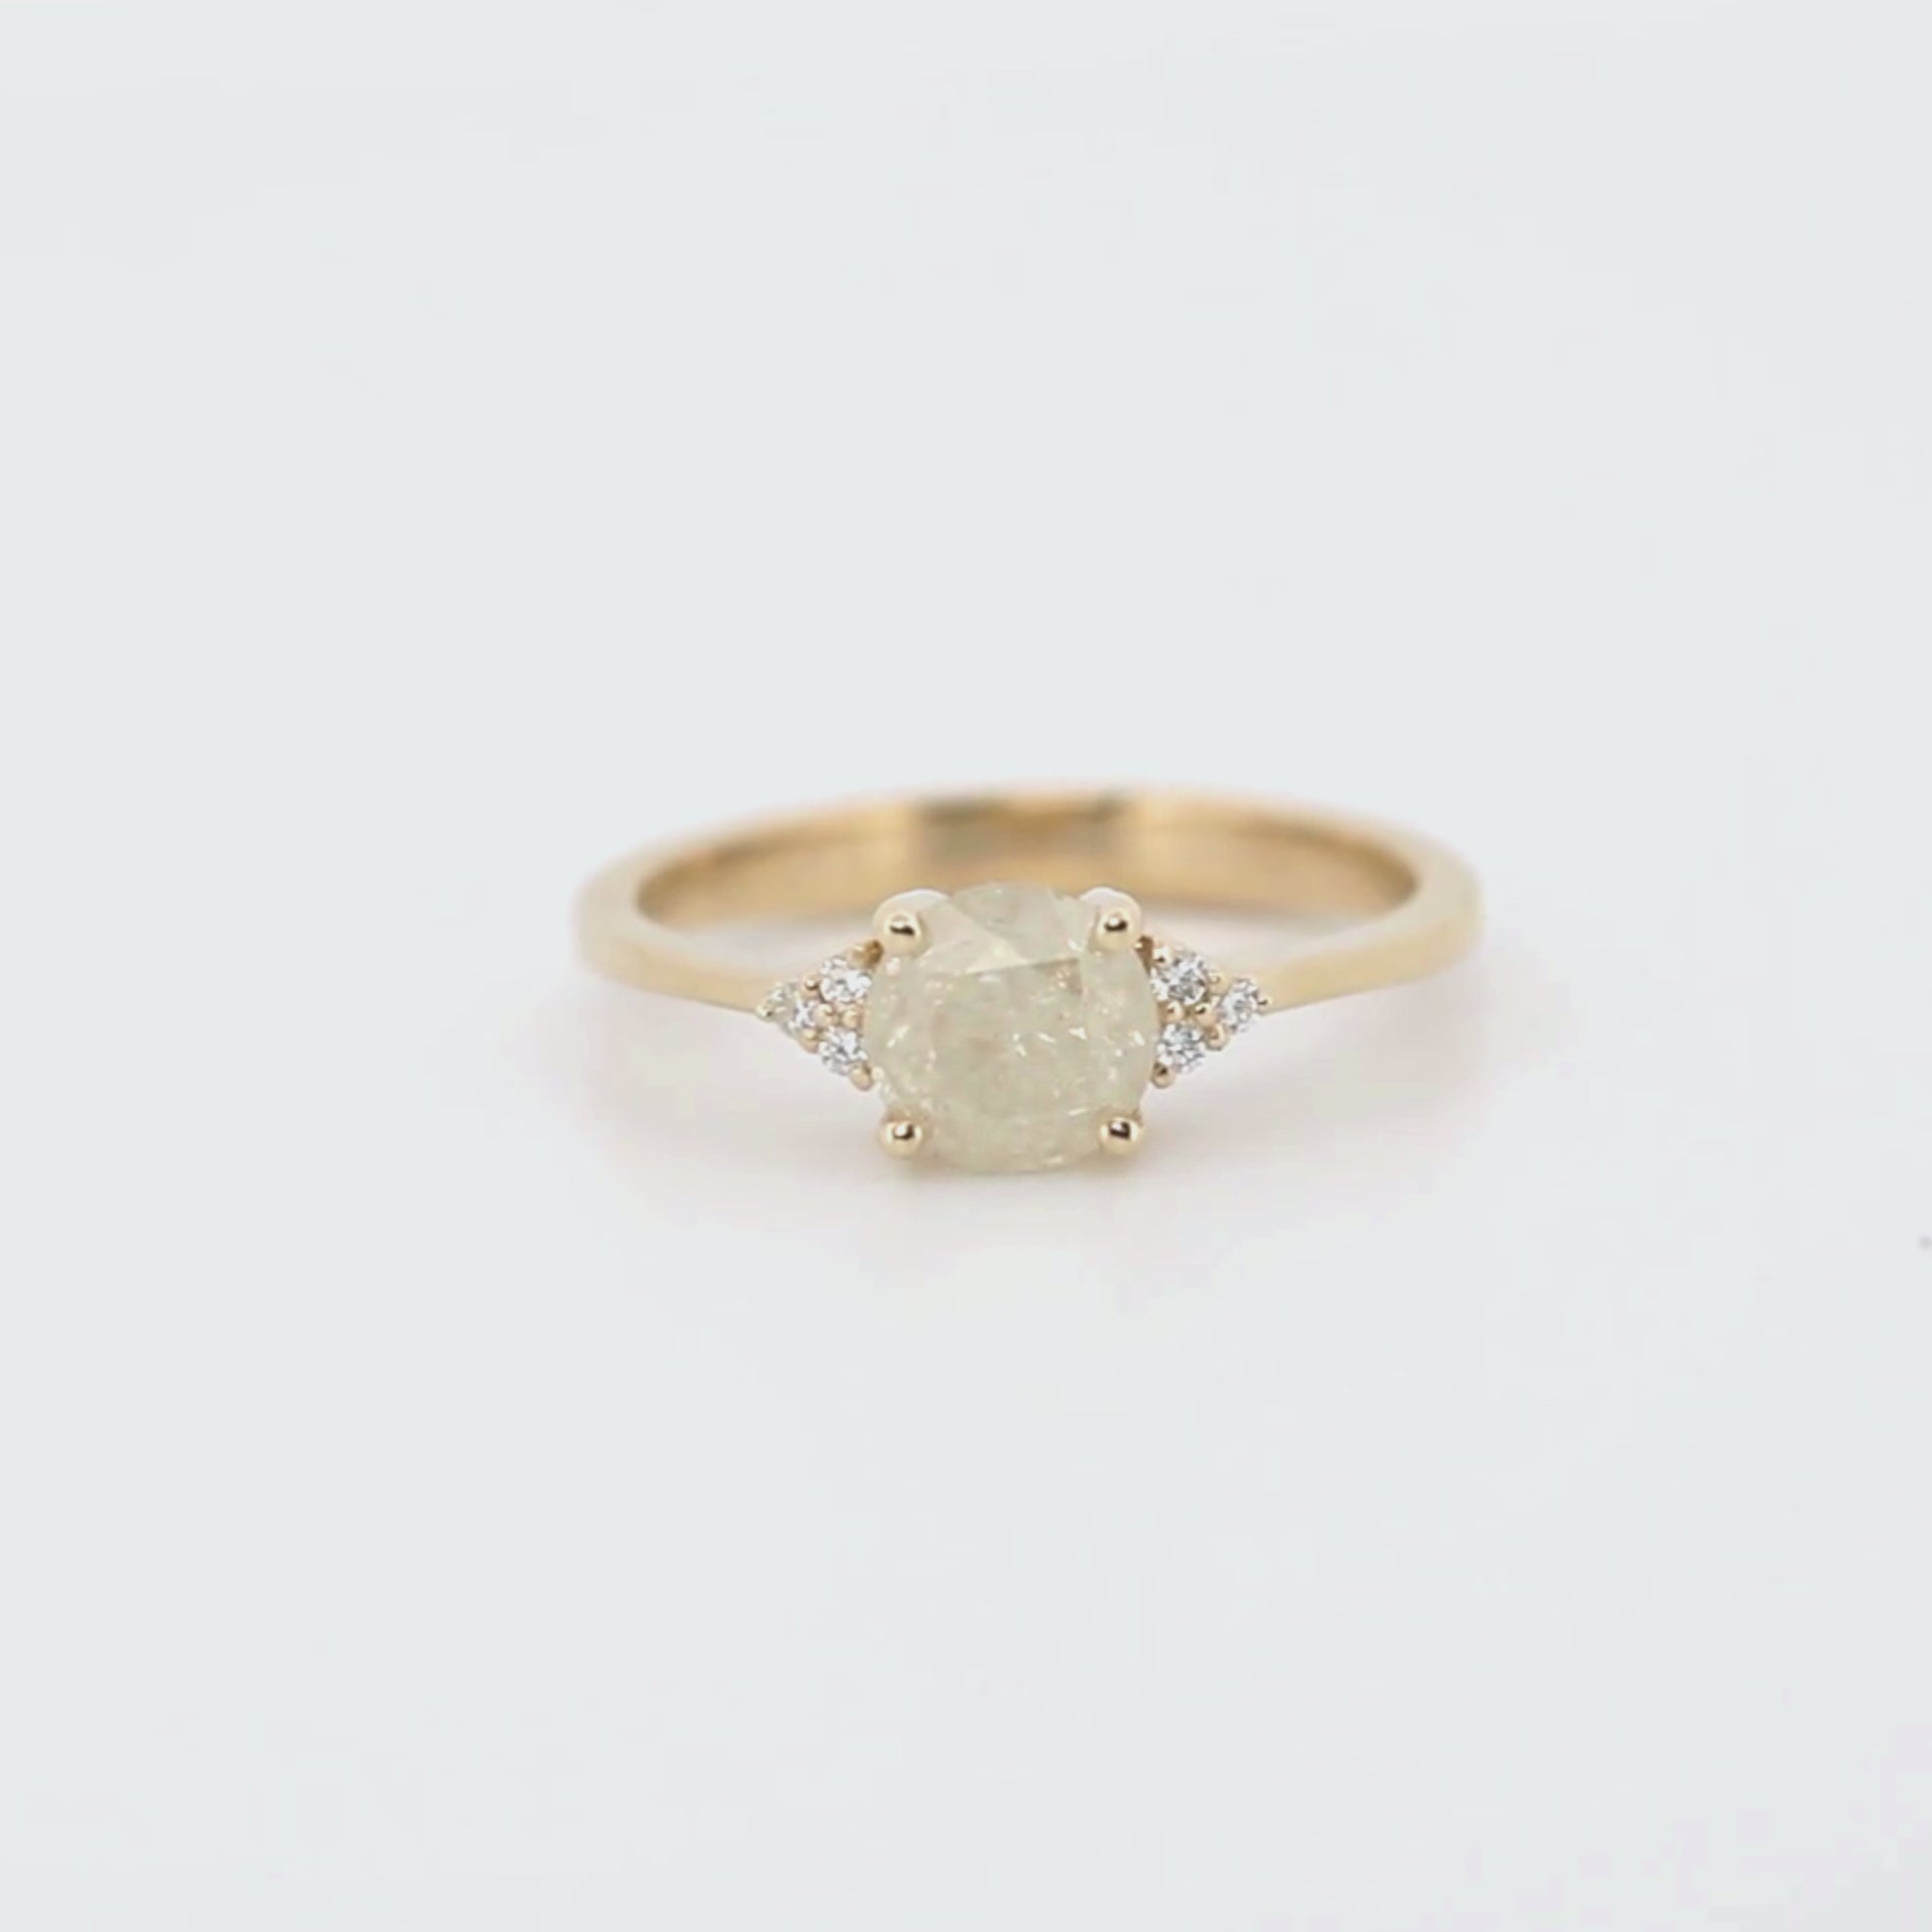 Imogene Ring with a 1.14 Carat Round Misty White Celestial Diamond and White Accent Diamonds in 14k Yellow Gold - Ready to Size and Ship